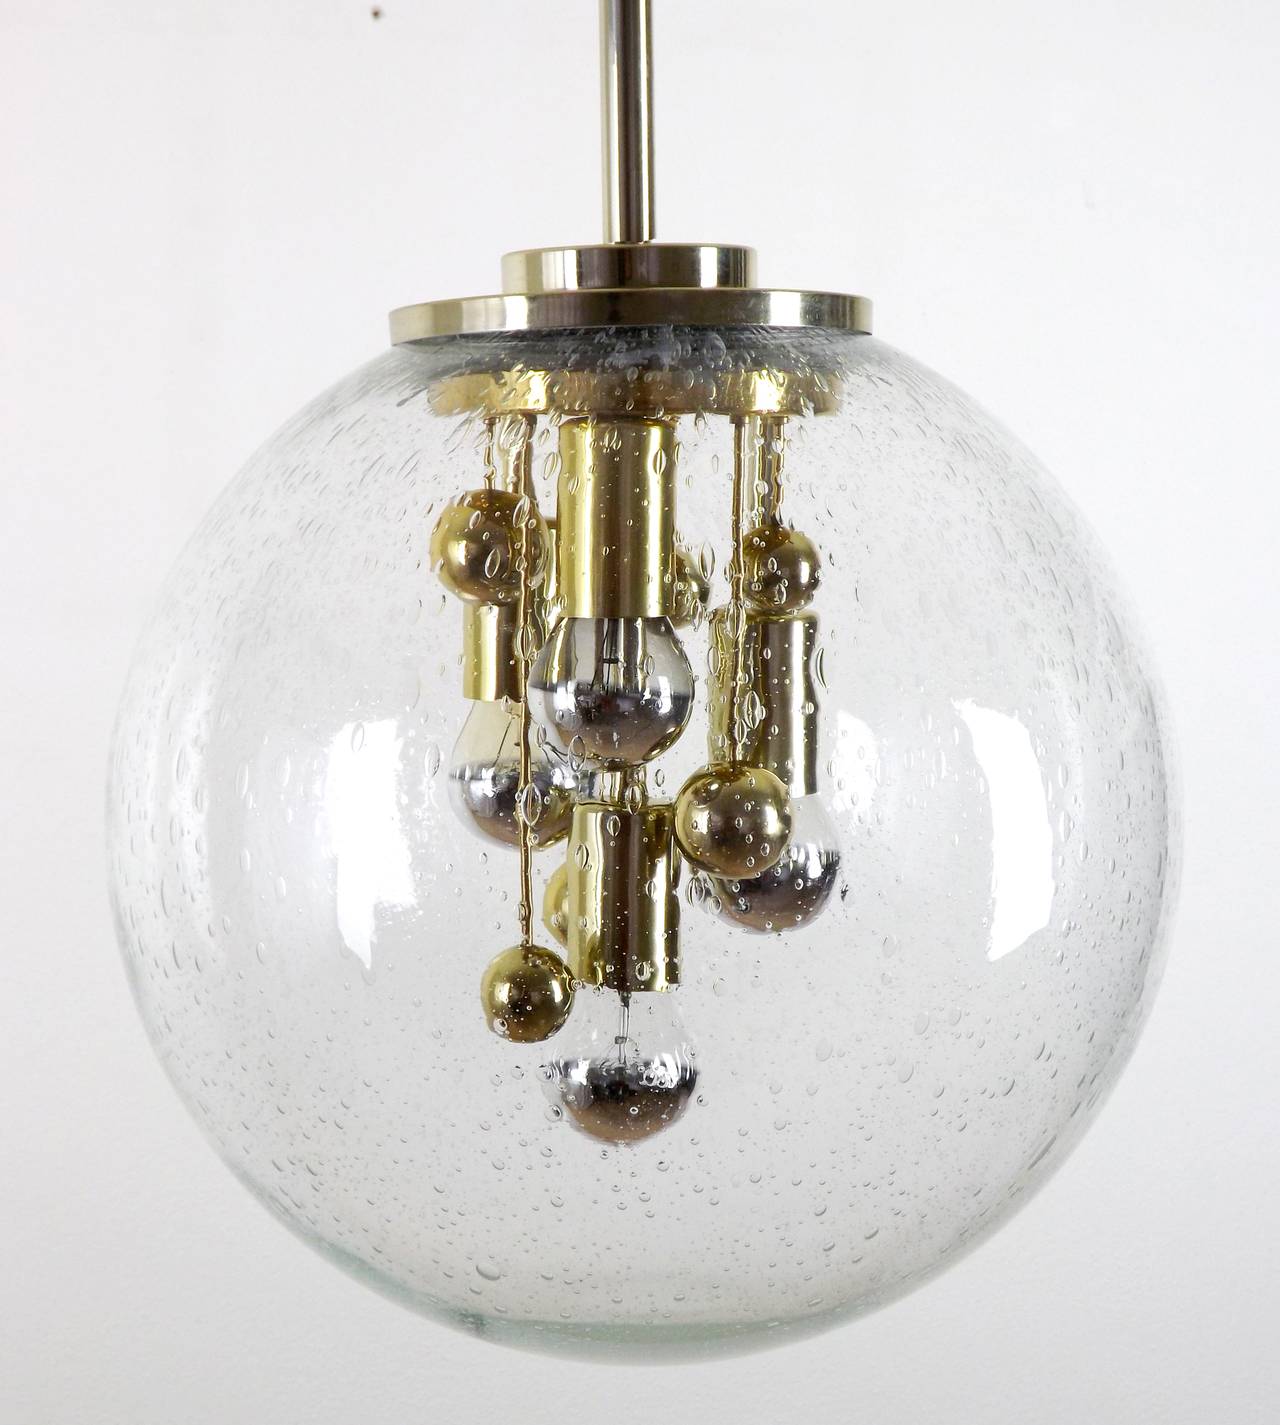 A fantastic pendant light chandelier by Doria Leuchten, Germany, manufactured in Mid-Century, circa 1970 (late 1960s or early 1970s).
An extra large hand blown glass globe with a brass fixture.
The lamp has four sockets for medium or standard screw